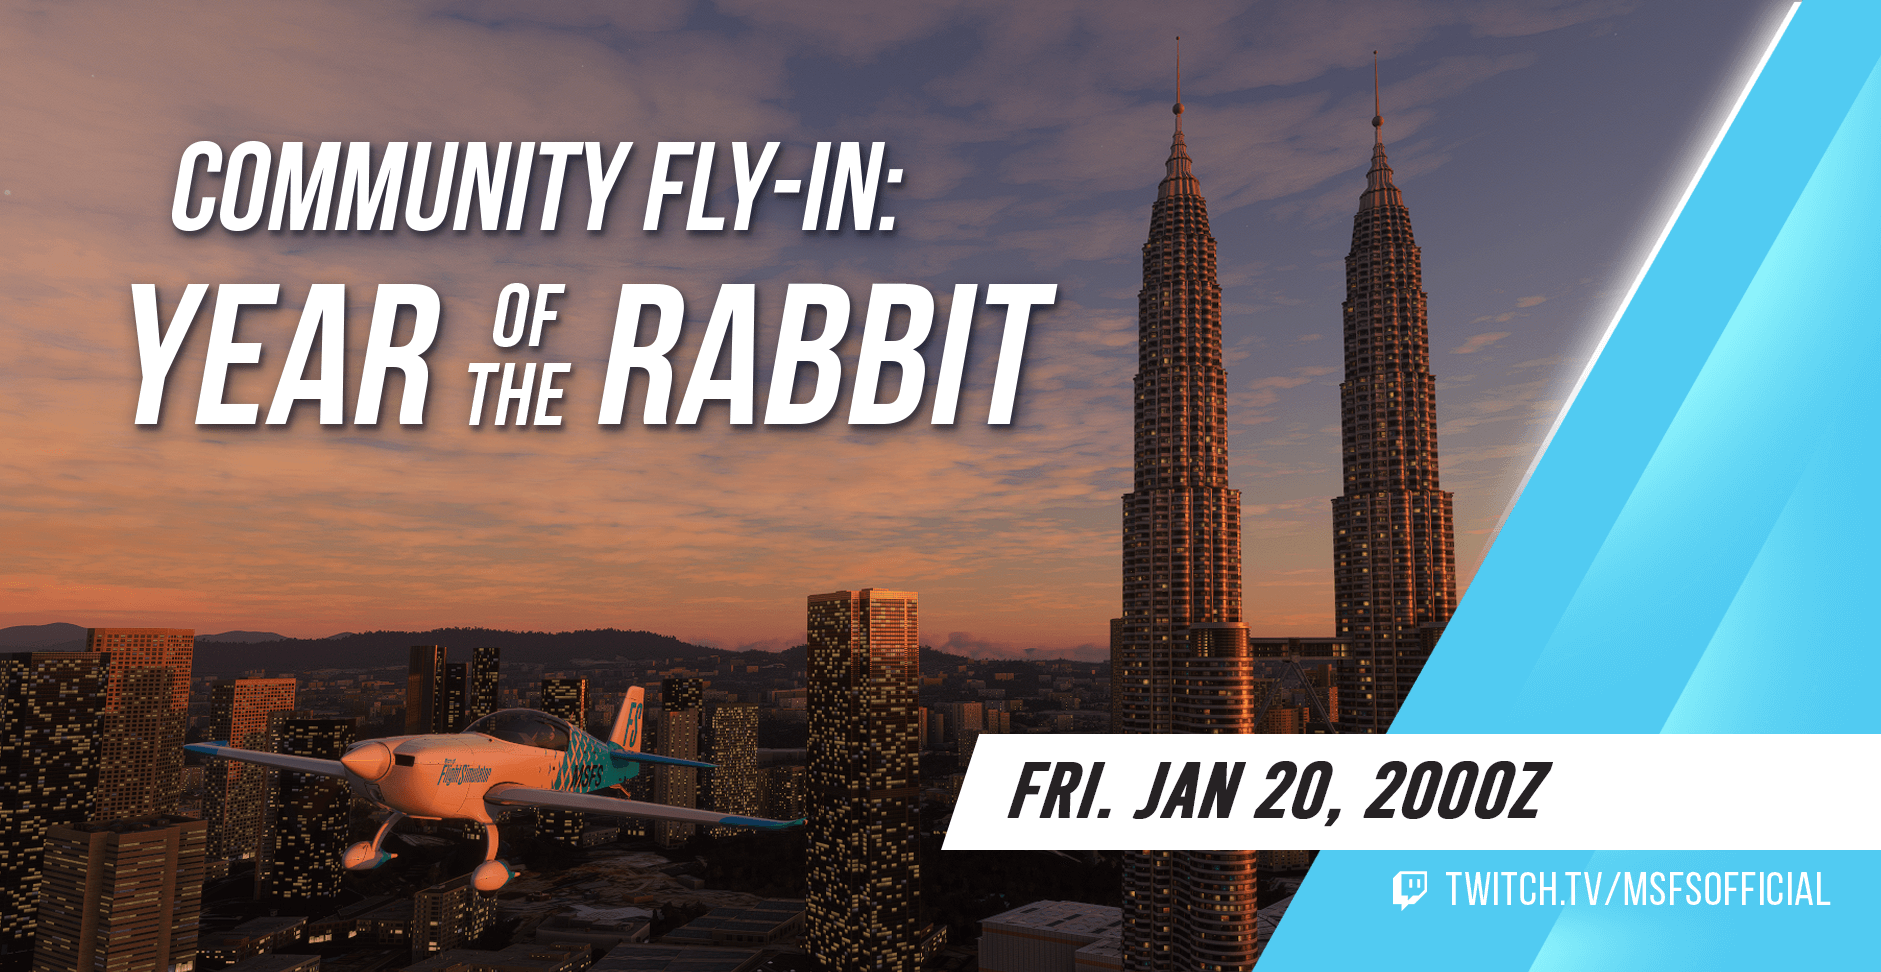 Community Fly-In: Year of the Rabbit. Friday, January 20th at 2000Z. Watch at Twitch.tv/msfsofficial.